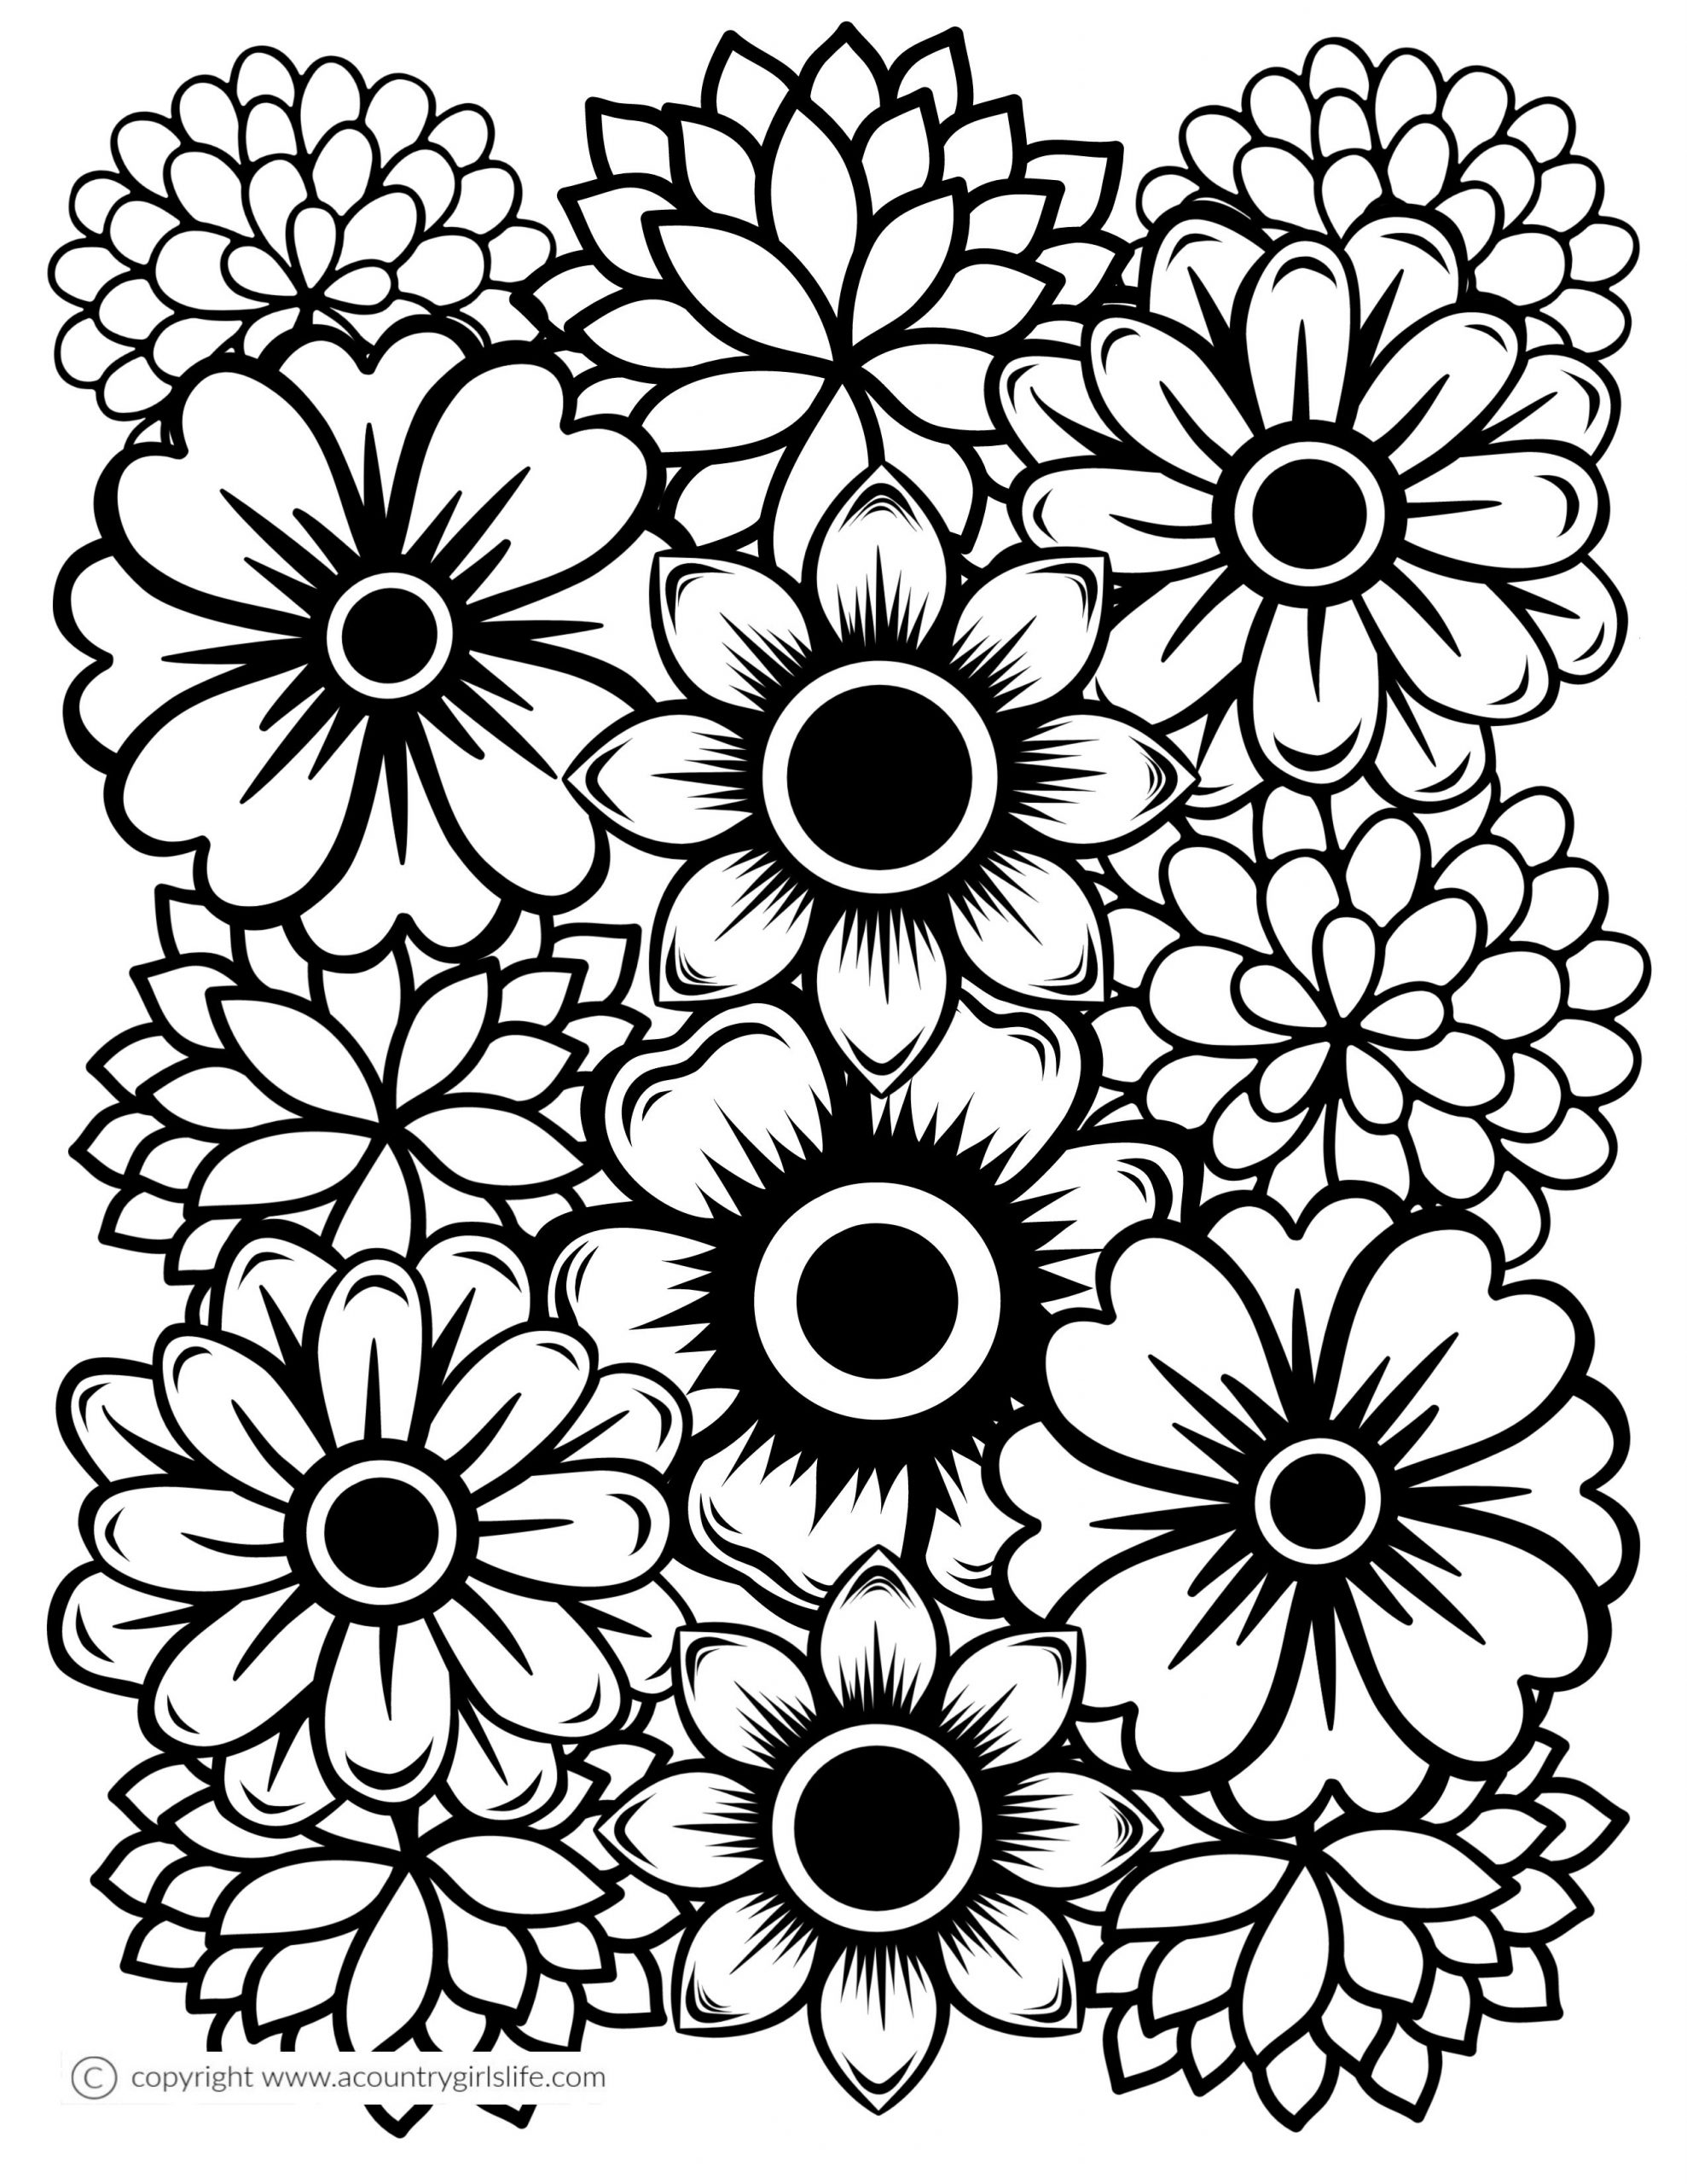 Coloring : 60 Marvelous Flower Adult Coloring Pages Photo Inspirations  Colorings